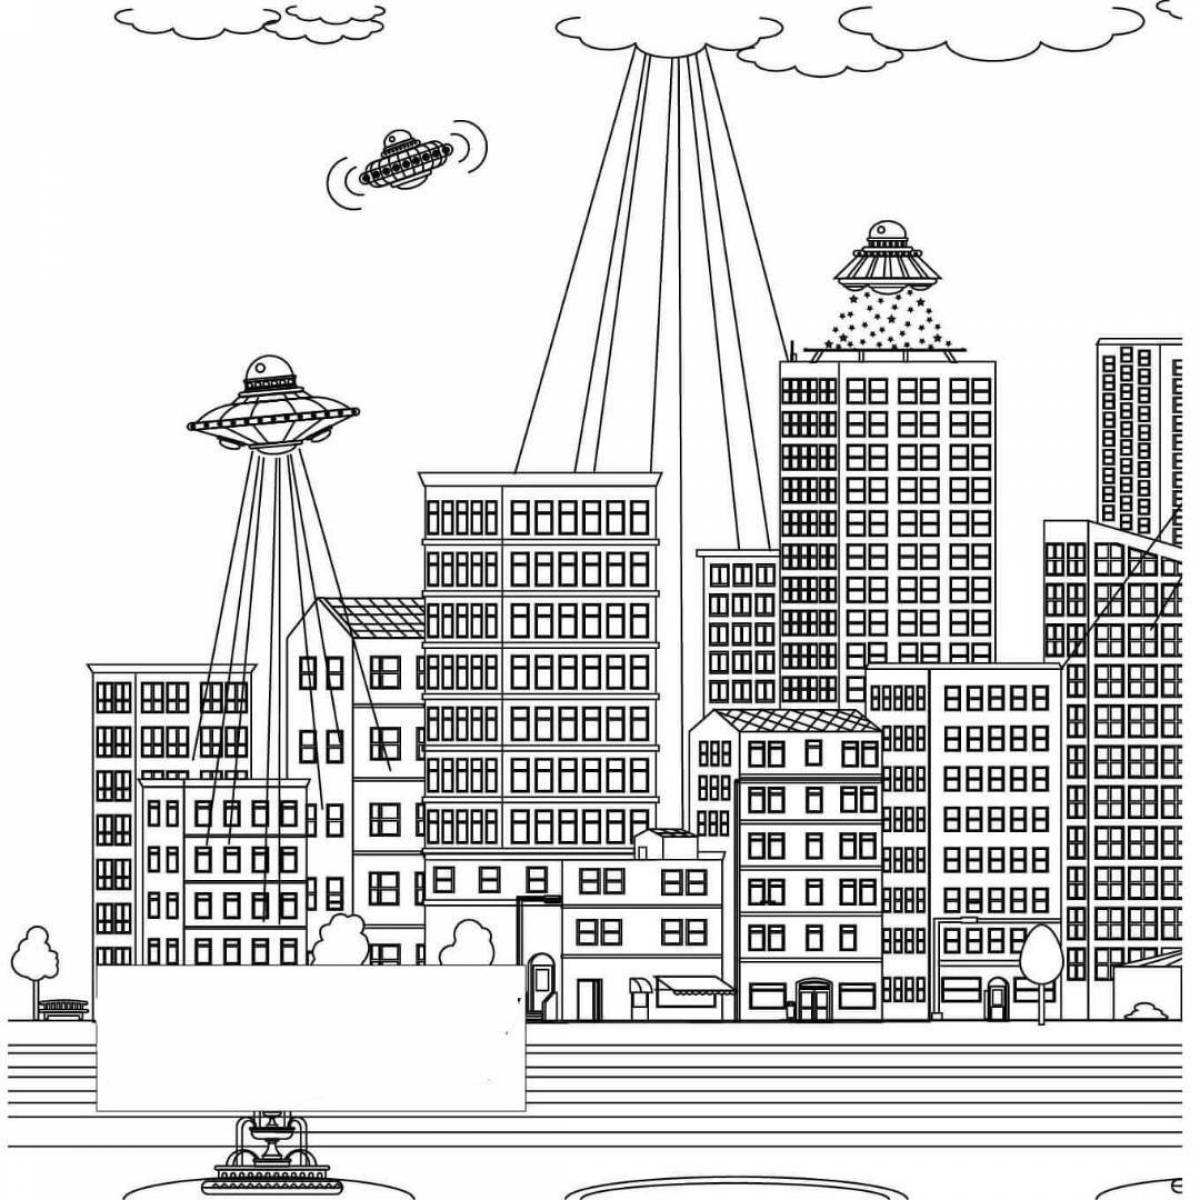 Coloring book sparkling city of the future